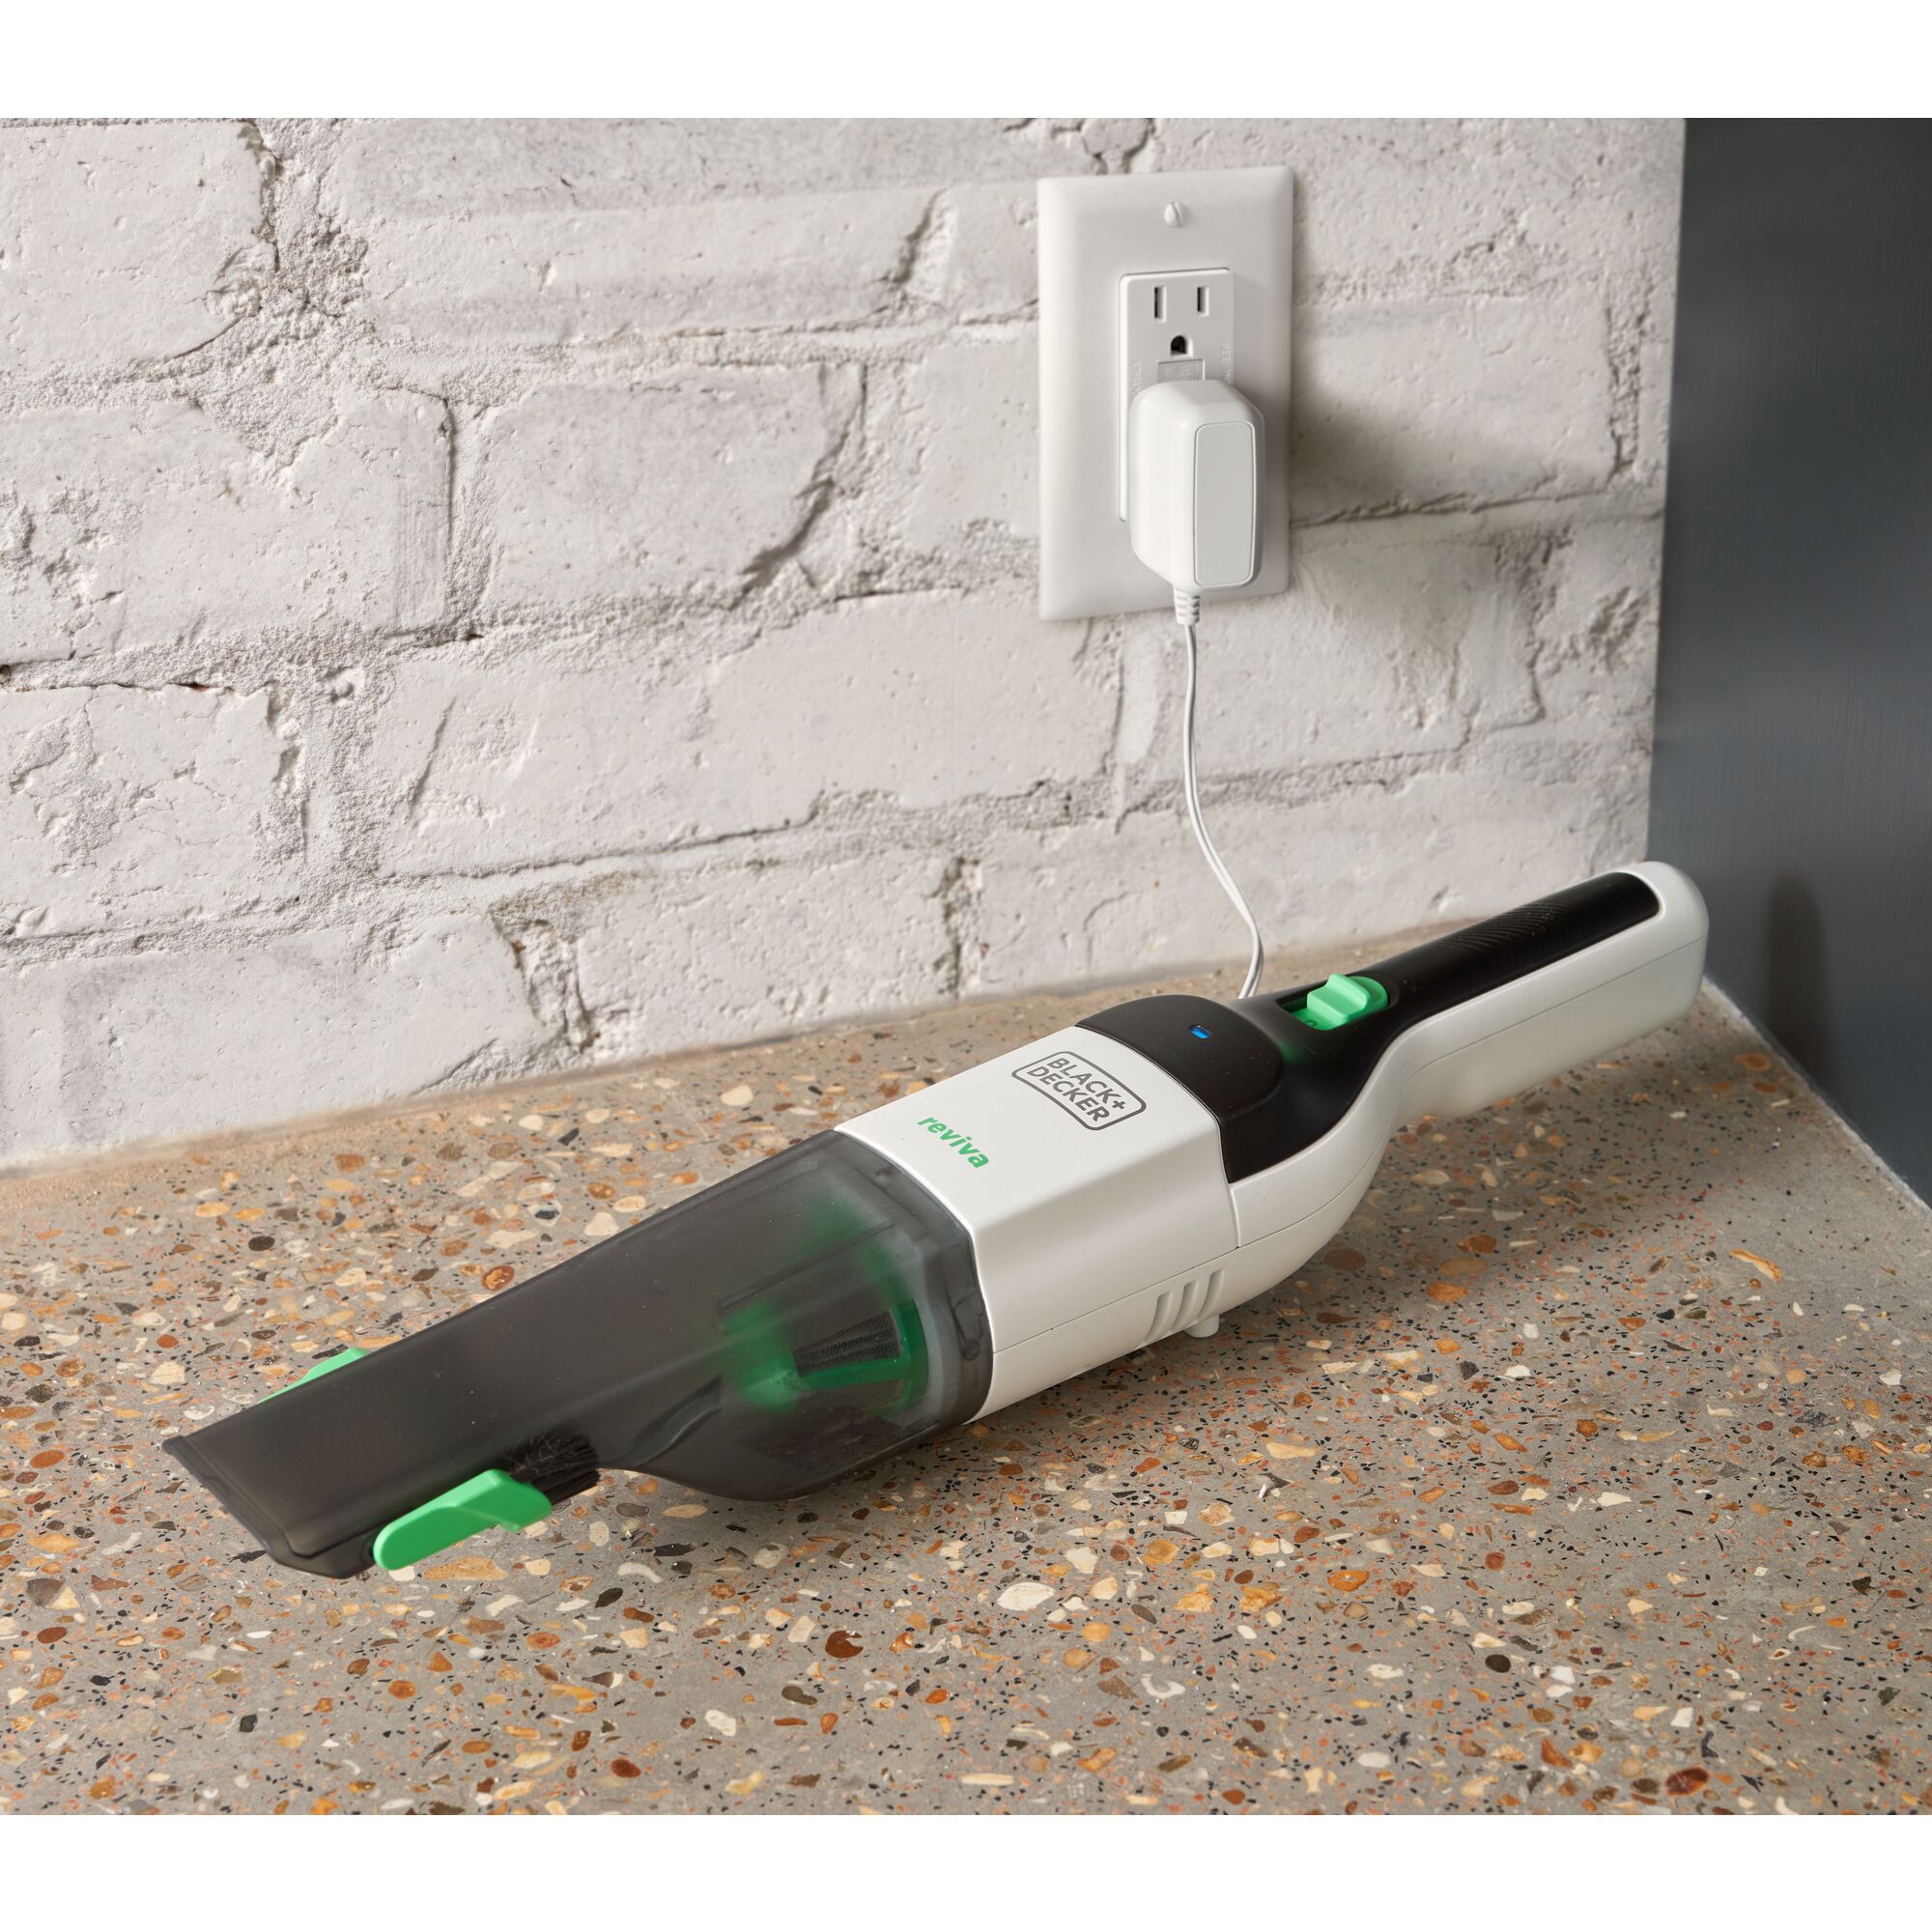 BLACK+DECKER reviva hand vac charging on a counter plugged into an outlet.